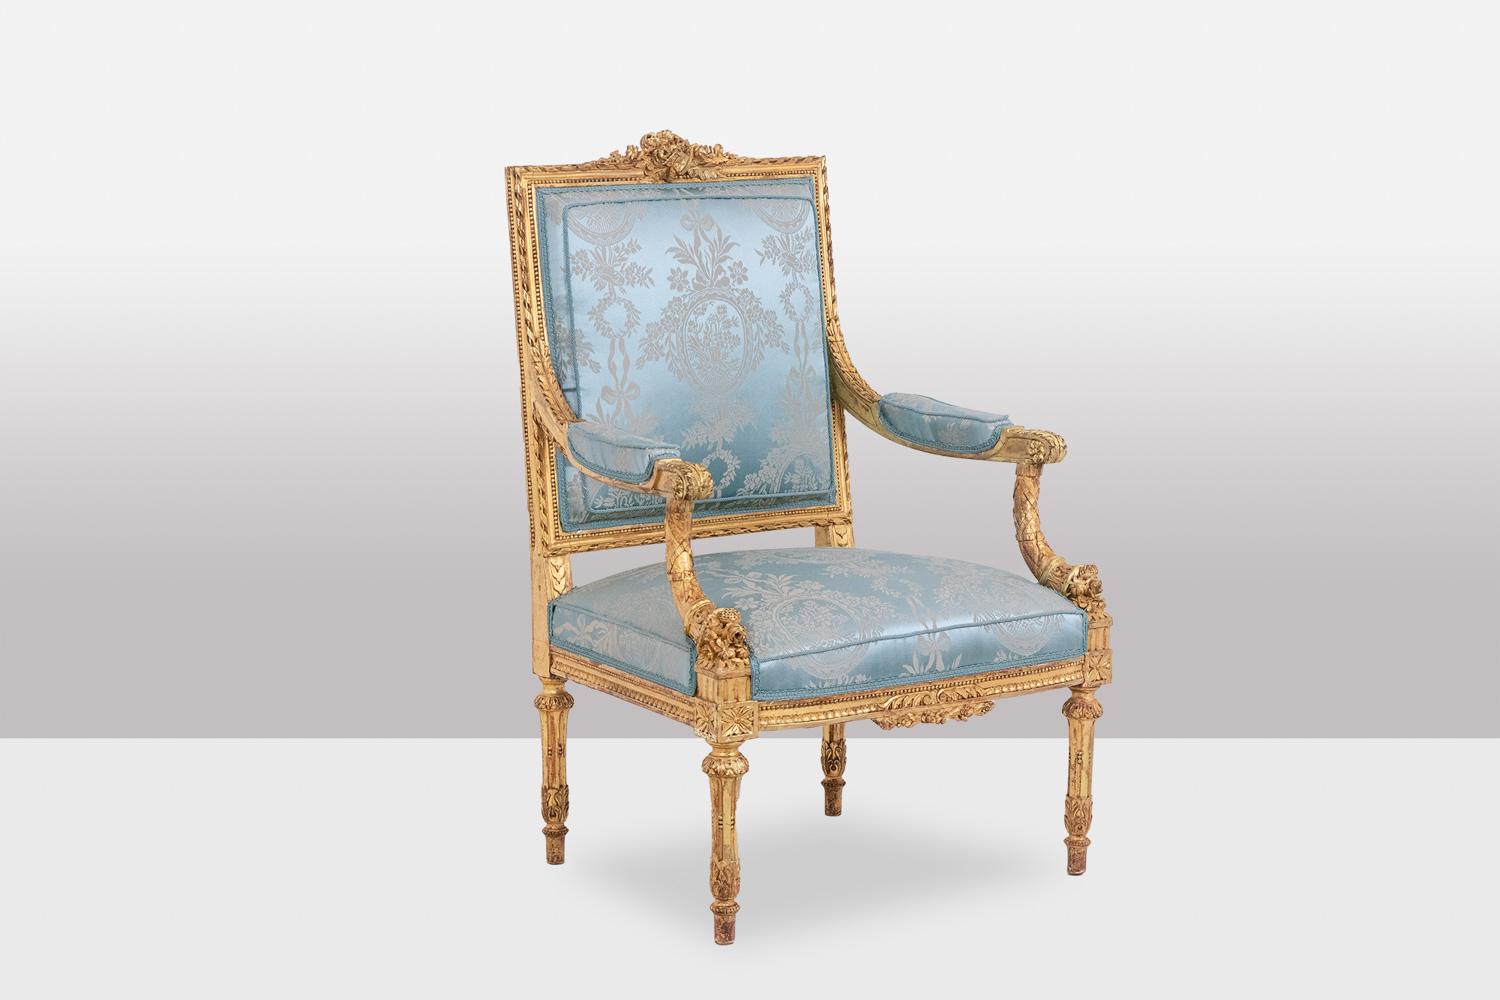 Pair of Louis XVI style armchairs in gilded and carved wood, “Marie-Antoinette” model, the top of the back decorated with a basket, garlands and flowers and its frame decorated with a finely beaded frieze, the armrests with cuffs set back from the